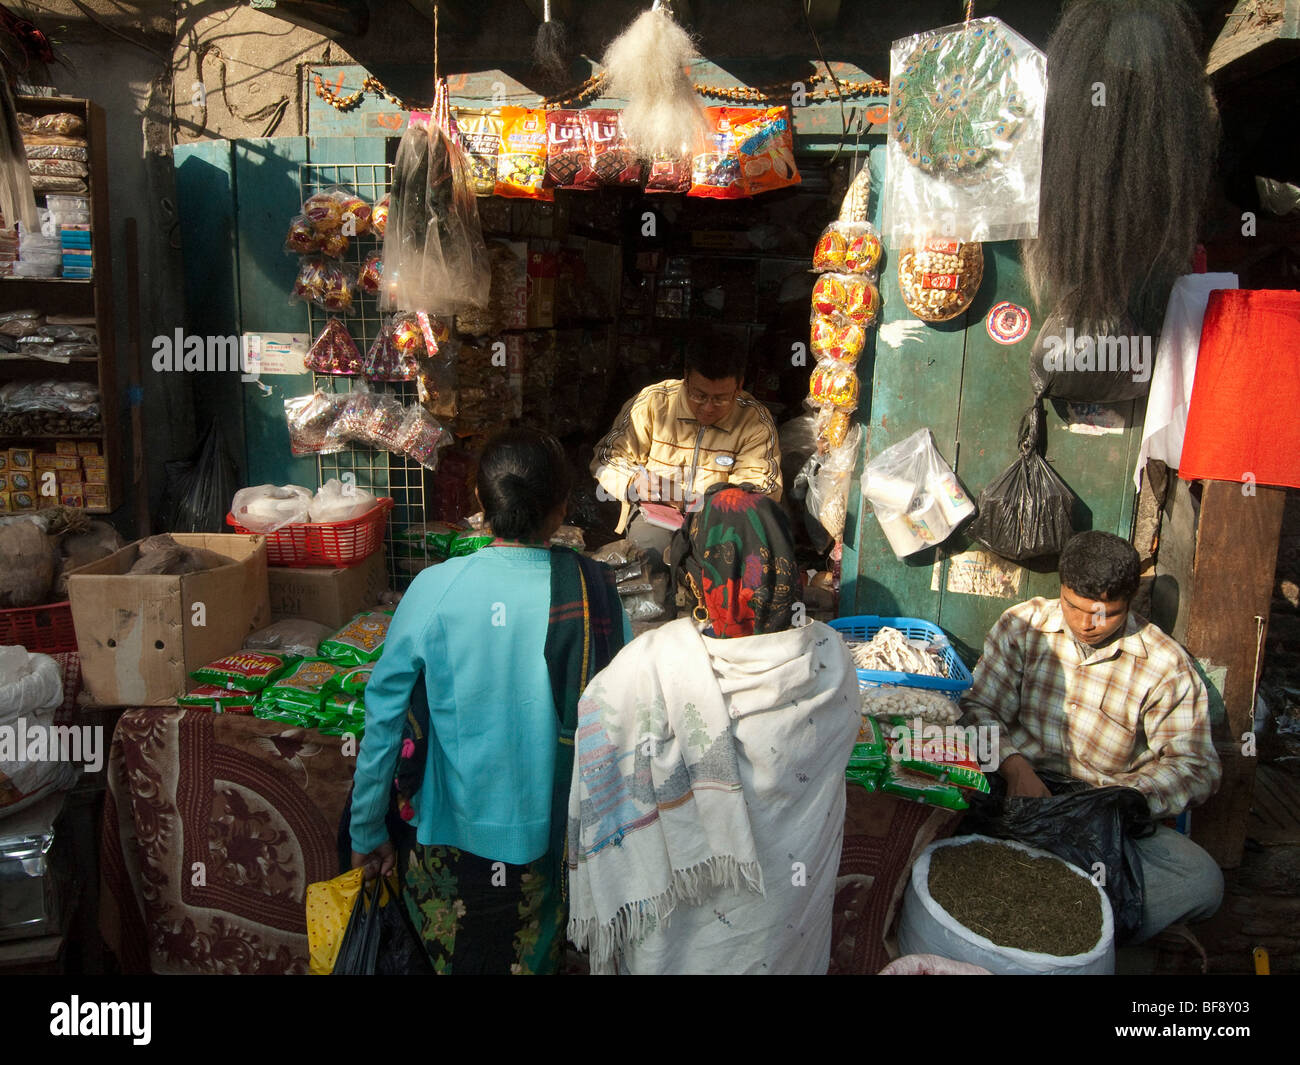 In the central squares of the city, local sellers sit in their side stalls offering a variety of goods from fresh food and Stock Photo